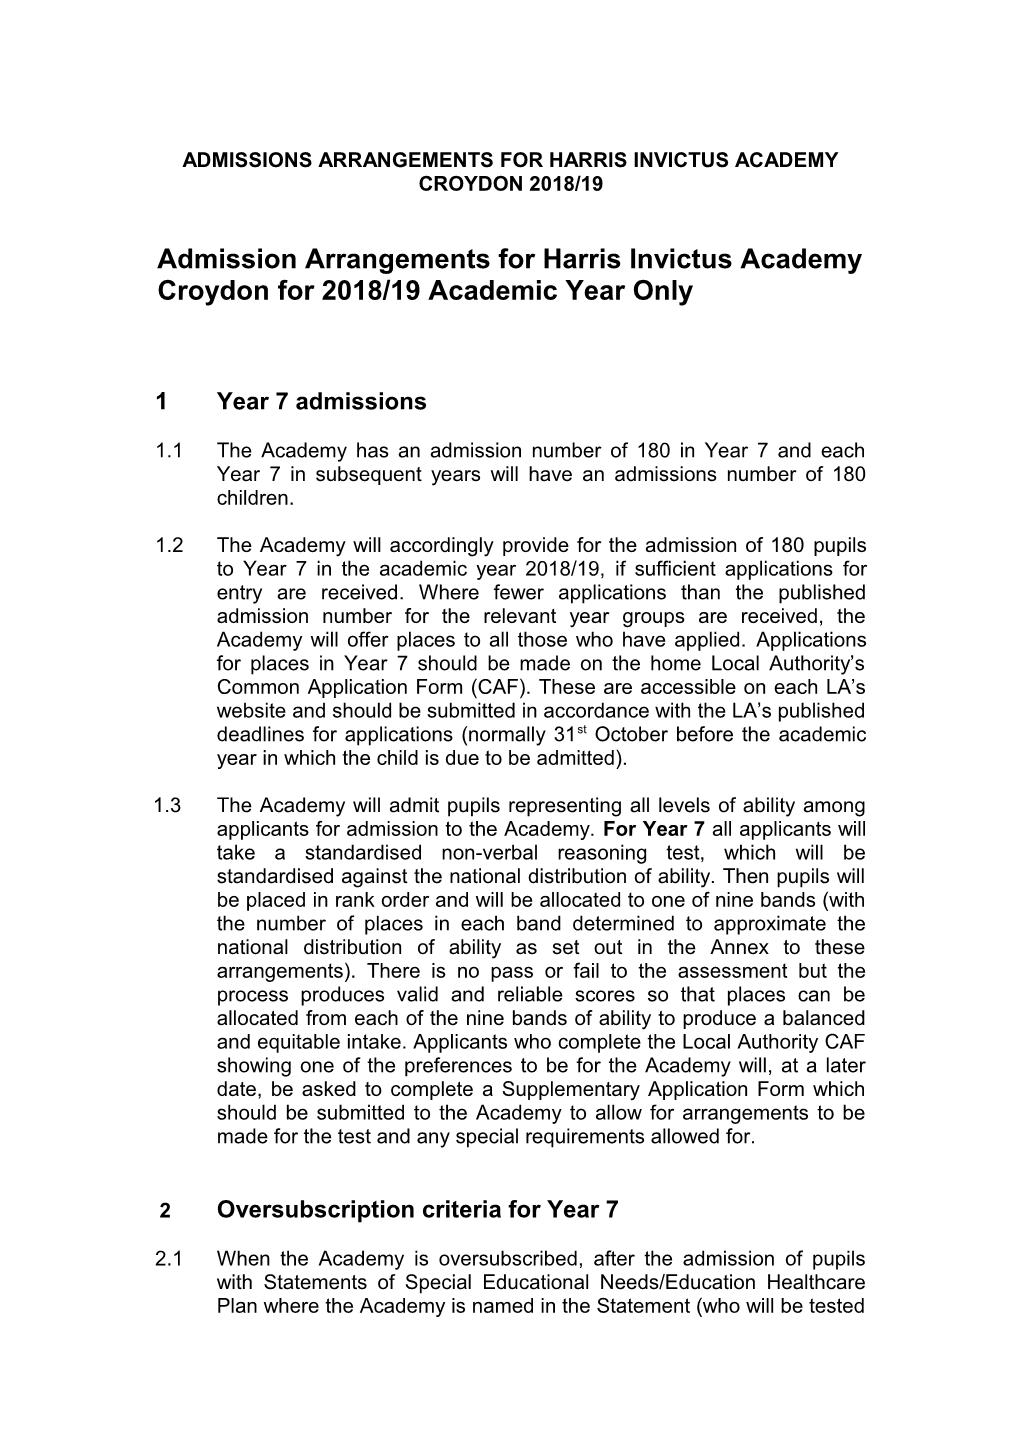 Template for Sponsored Academy Admission Arrangements Annotated Version